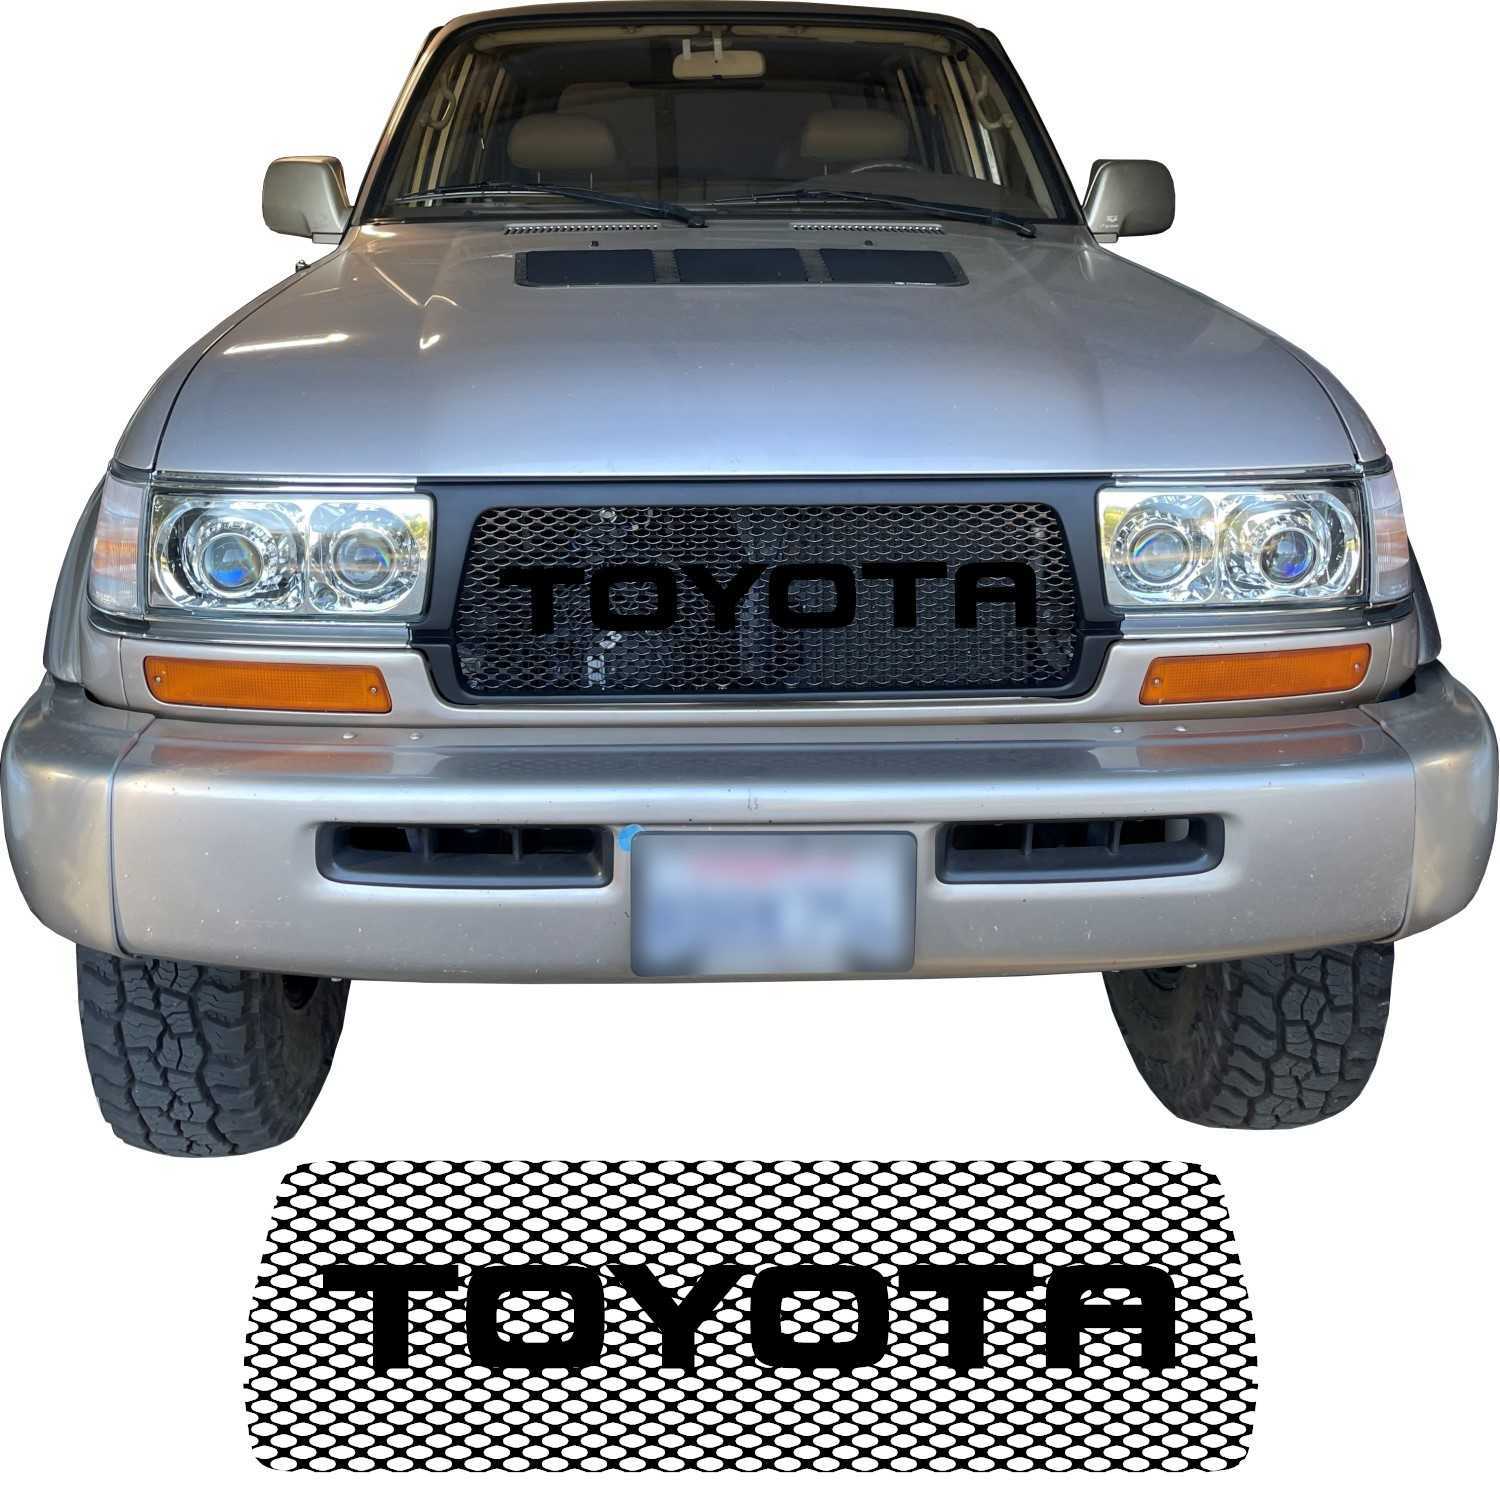 Voeding Lyrisch Kritiek 1995 - 1997 Toyota Land Cruiser Series 80 Mesh Grill Insert and Big Letters  by customcargrills